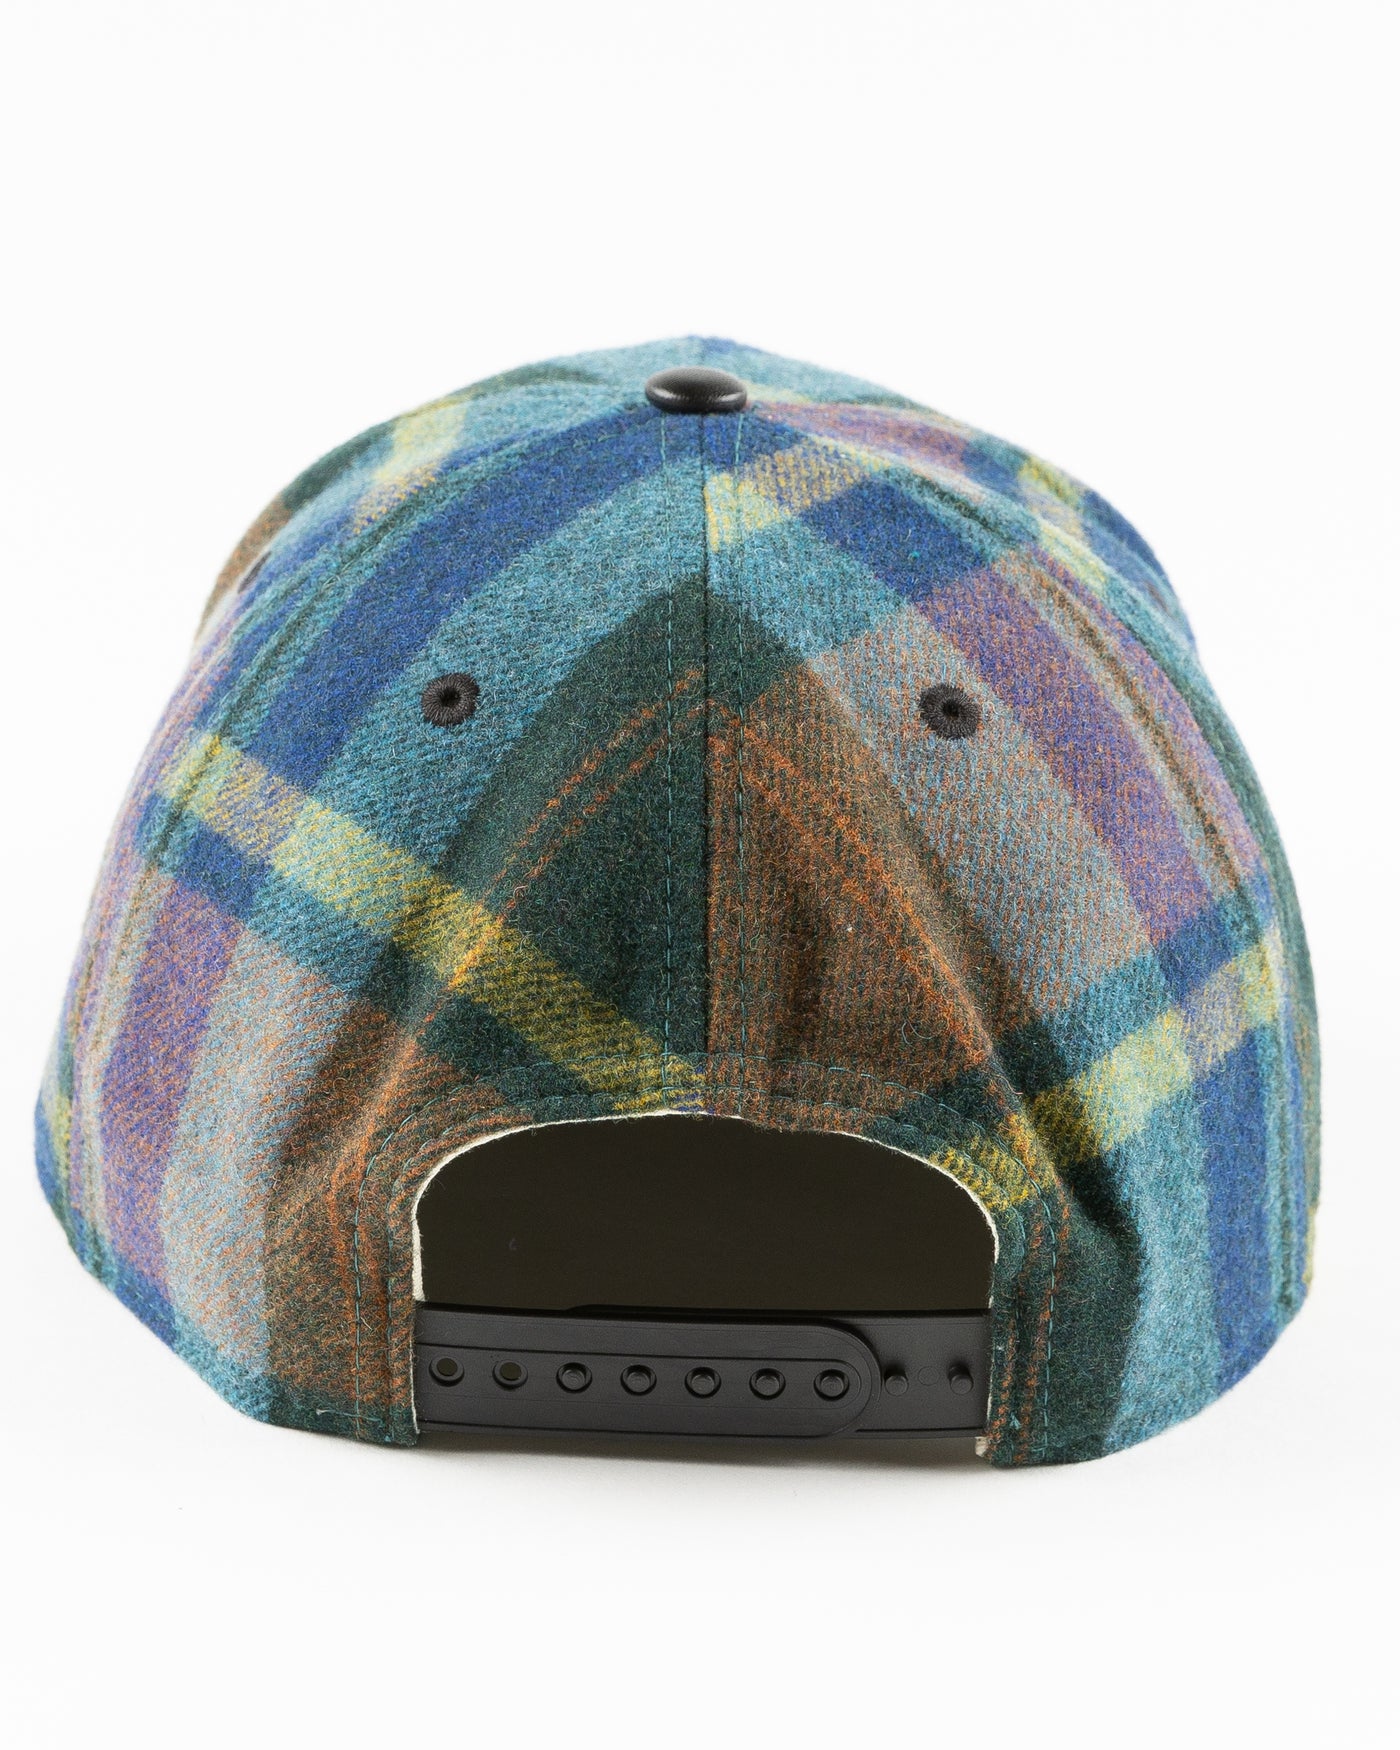 New Era snapback with wool checker crown and vintage Chicago Blackhawks logo and leather flat brim - back lay flat